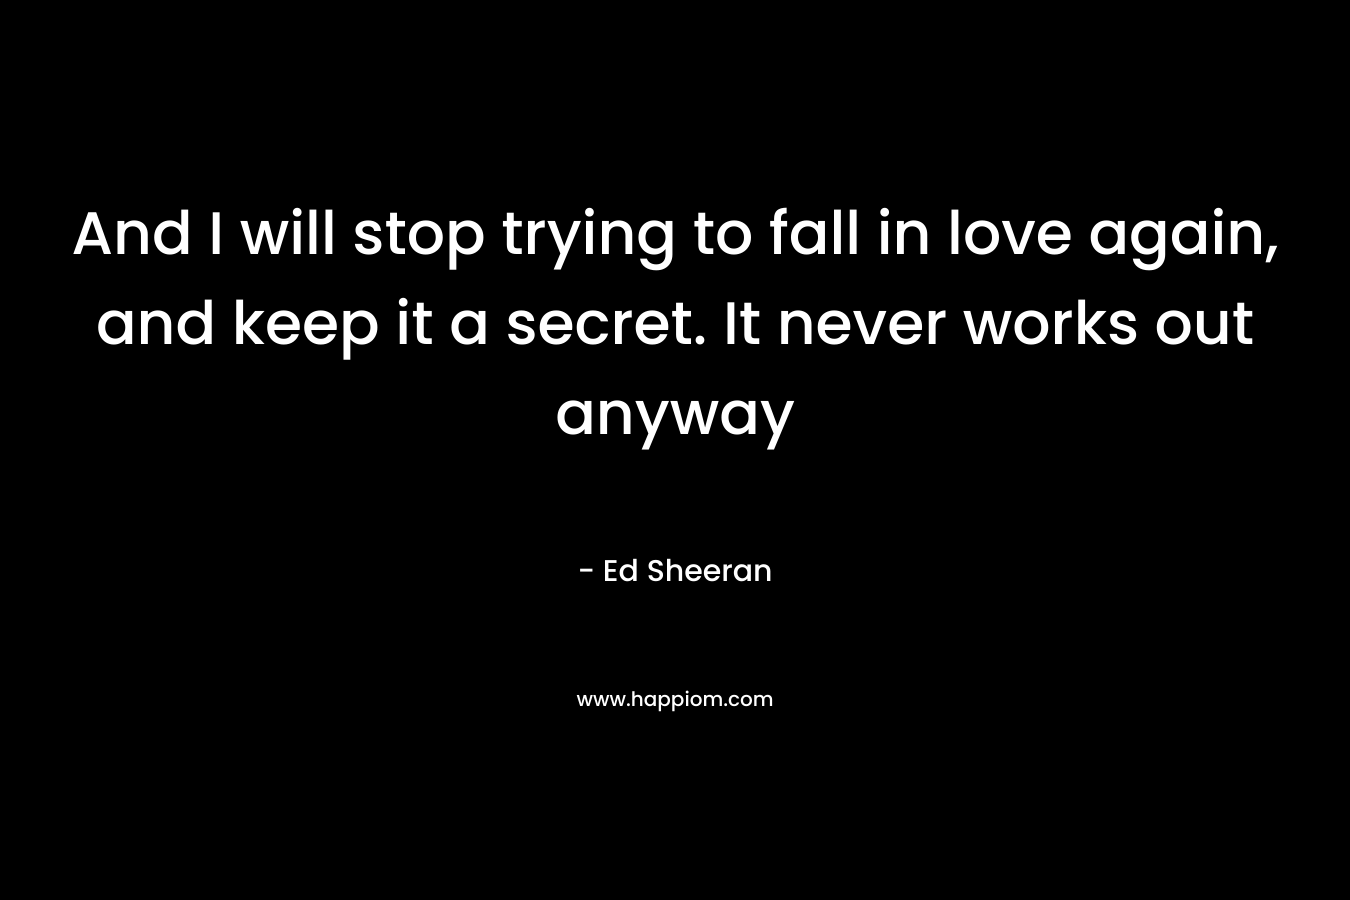 And I will stop trying to fall in love again, and keep it a secret. It never works out anyway